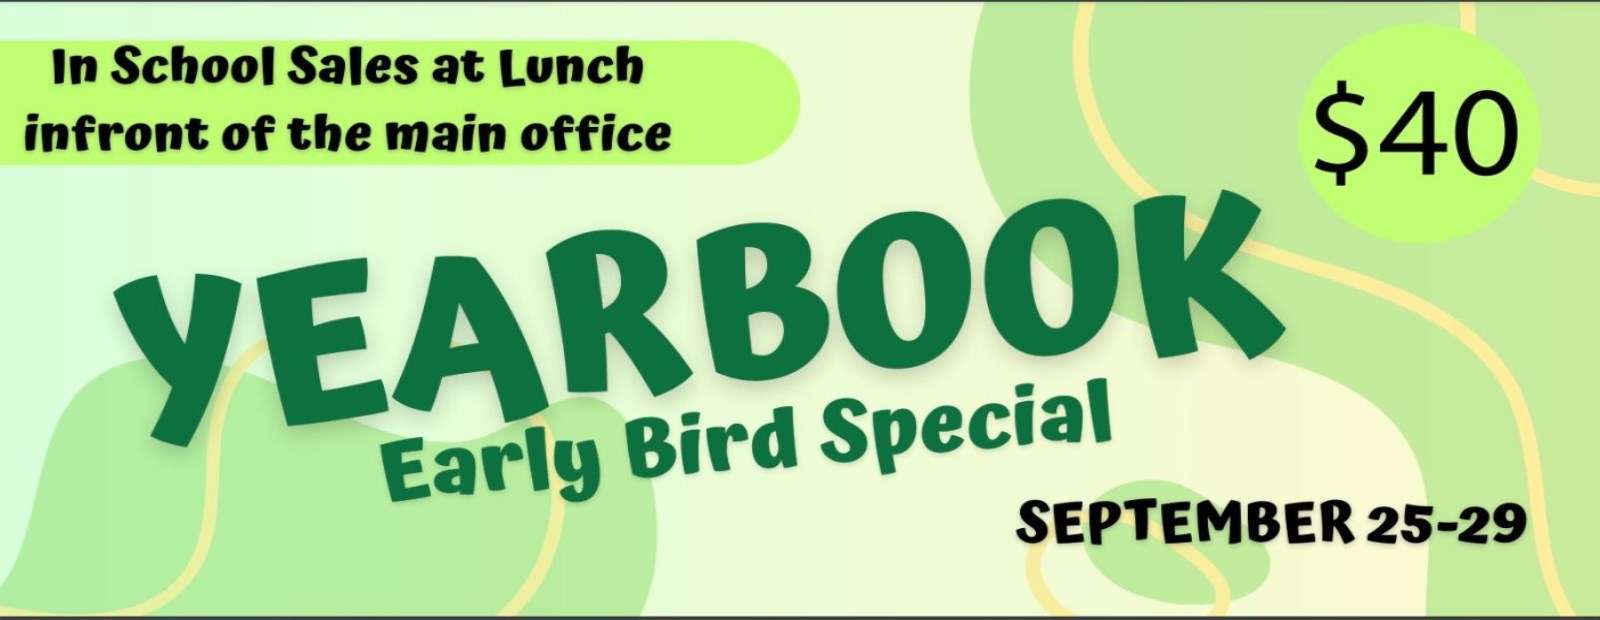 Early Bird Yearbook Sales